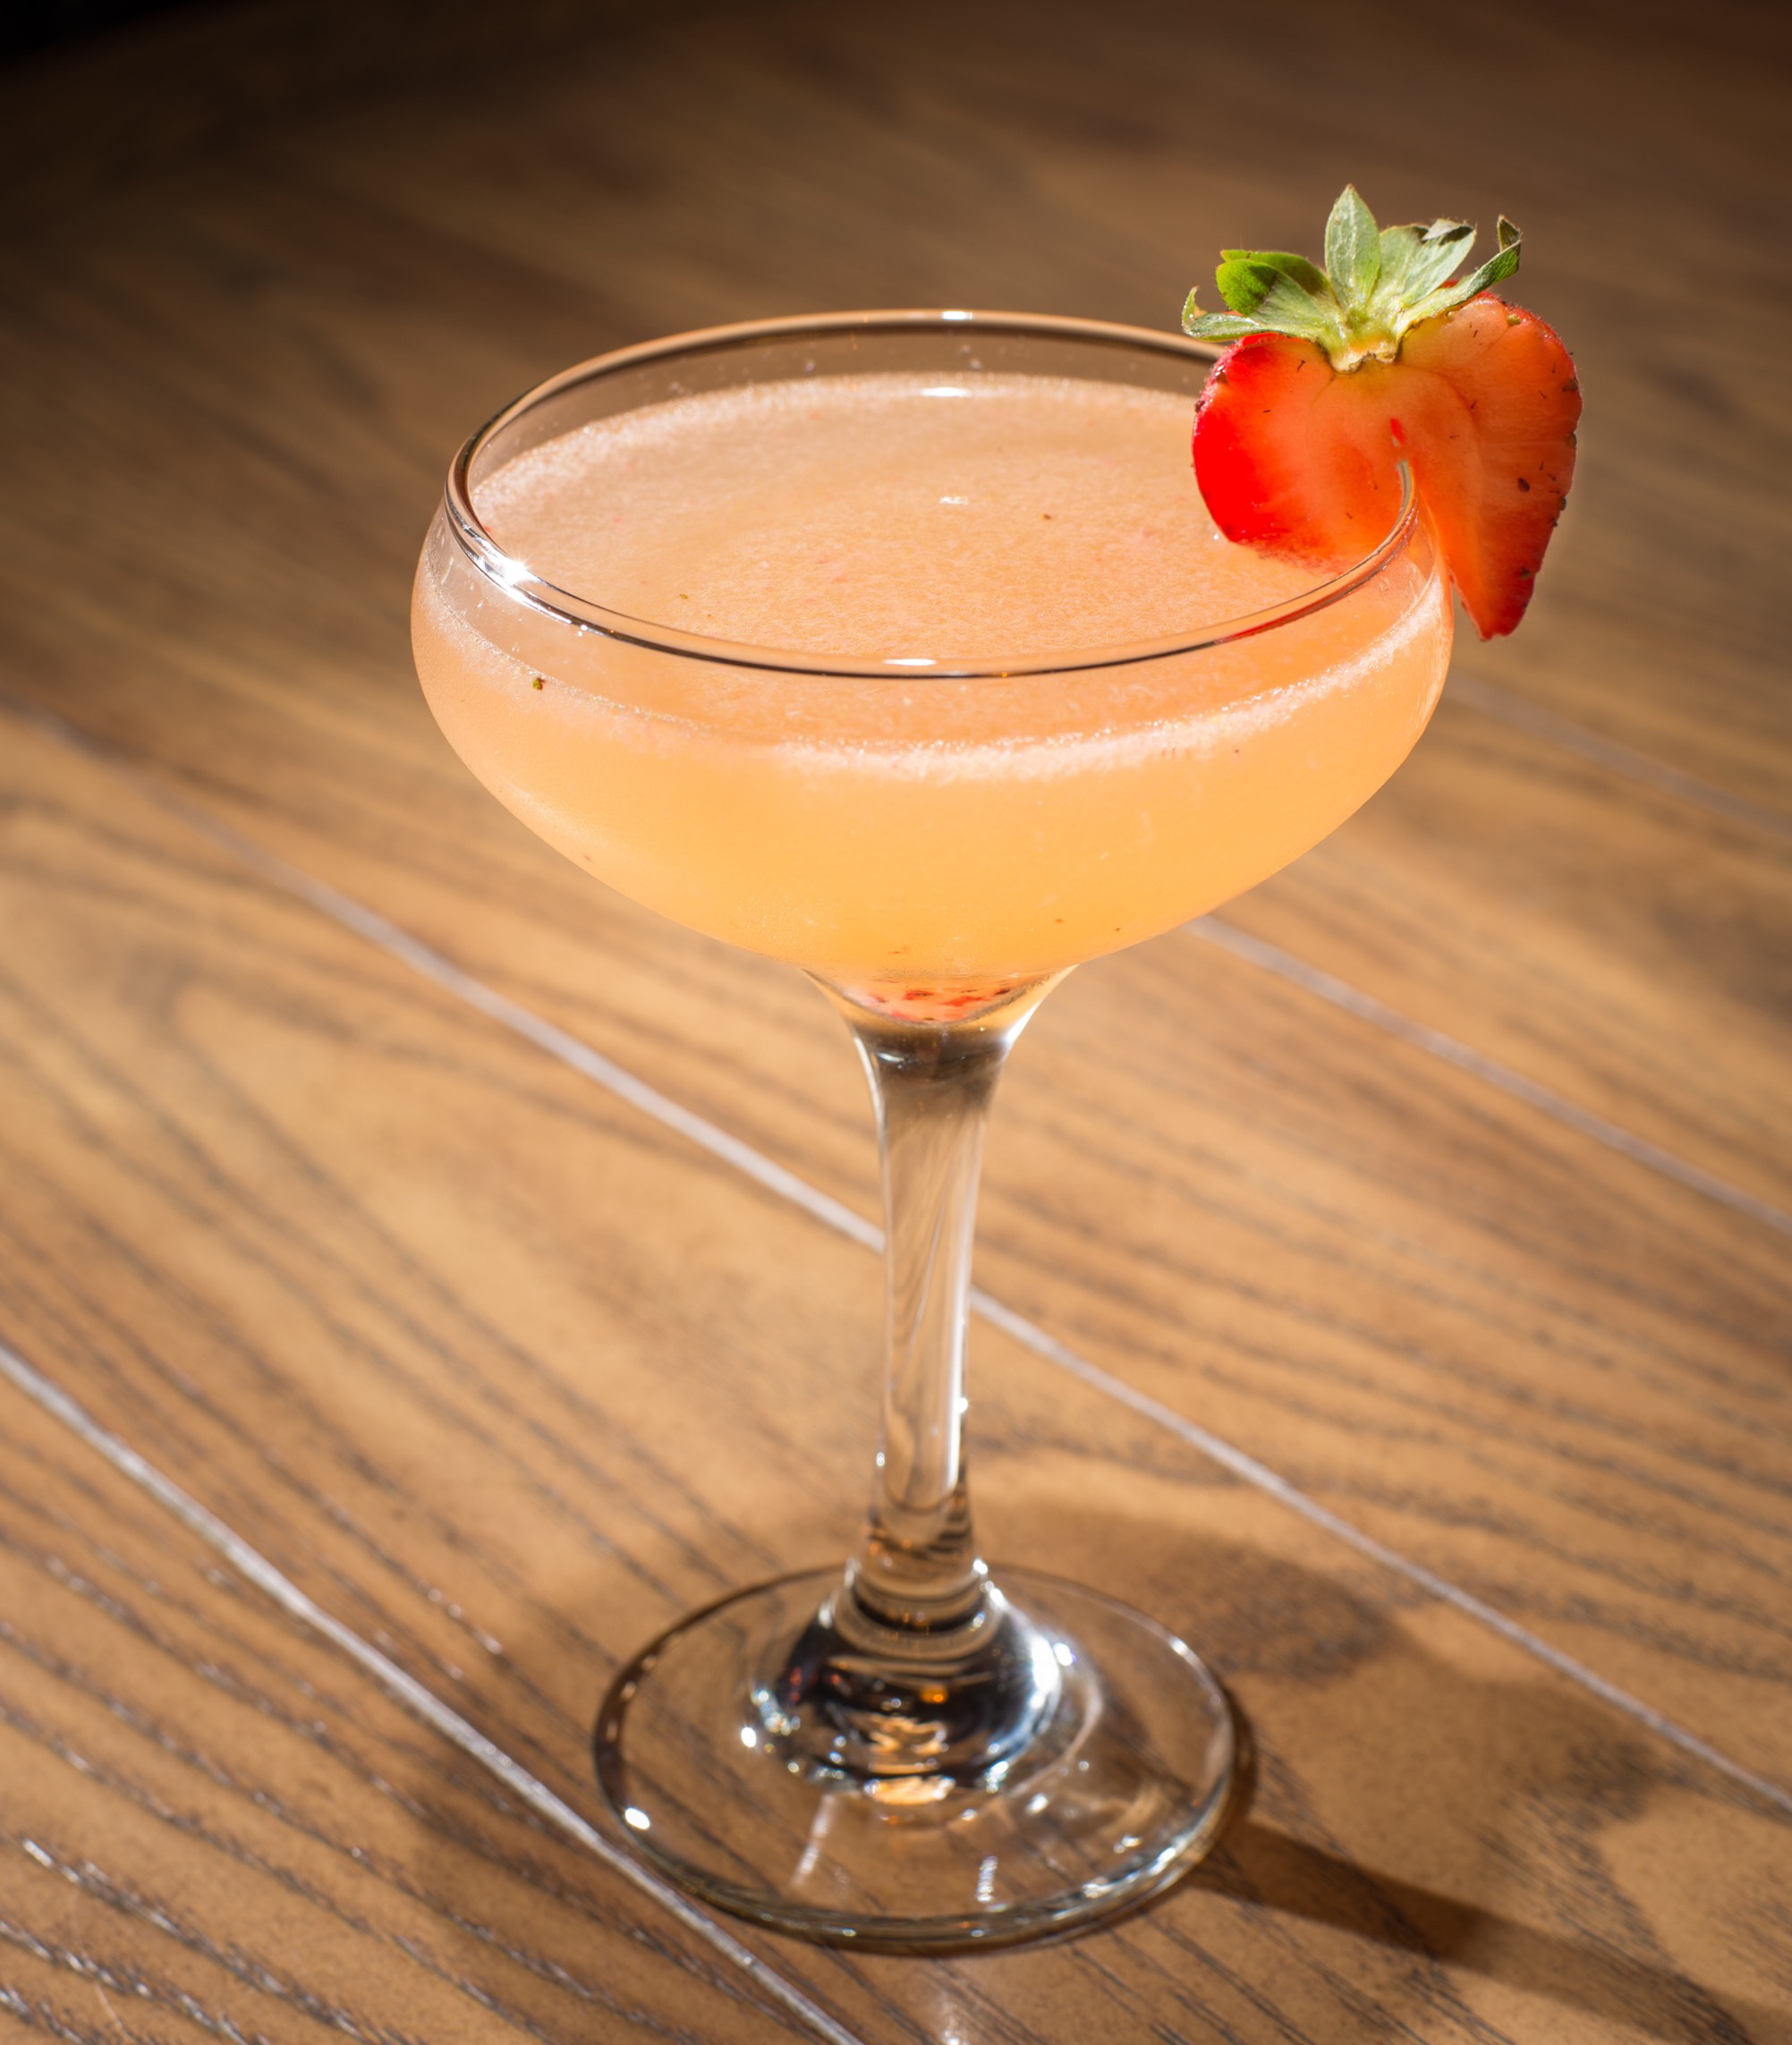 The Jezebel 75' is a delicious champagne-infused cocktail mixed with strawberries and fresh orange juice, and spiked with vodka for an extra kick! 